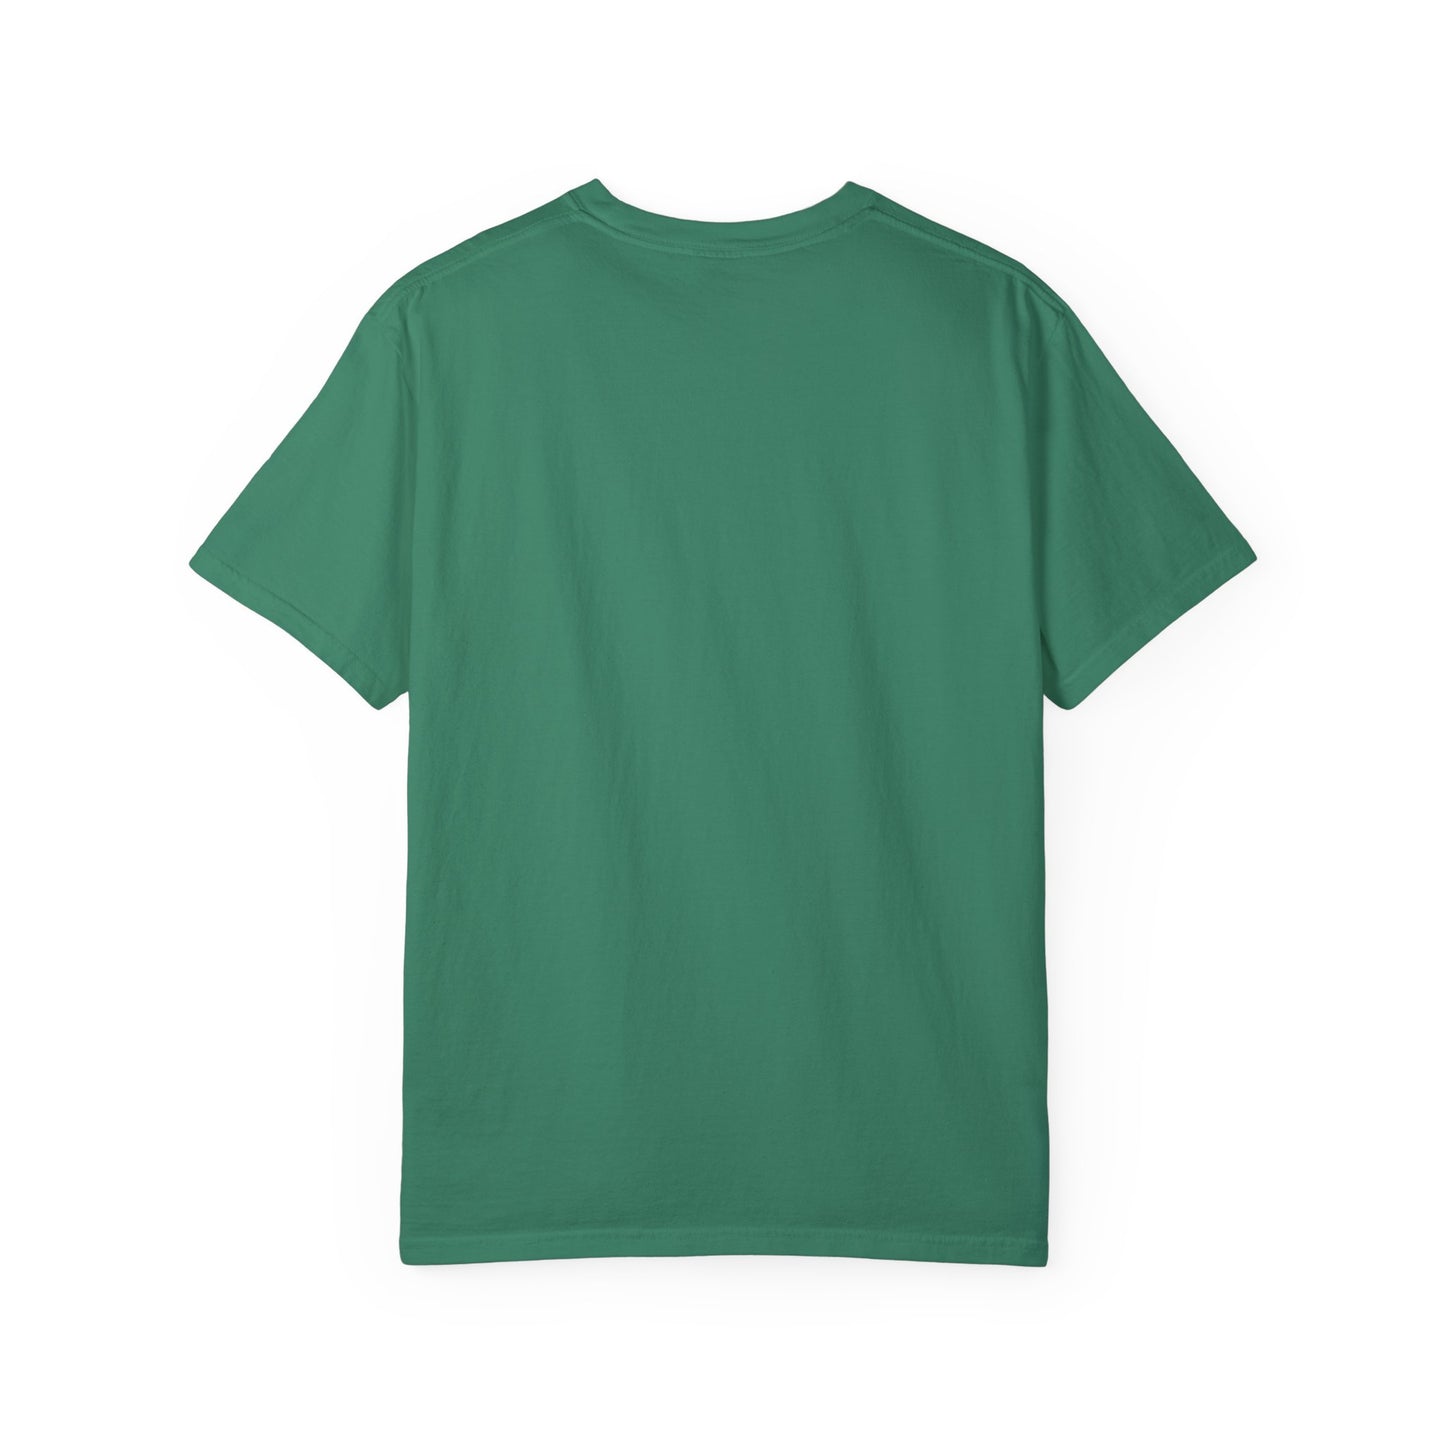 Unisex Comfort Colors T-shirt | Villagers of Mainstrasse VOM Cheese Clean